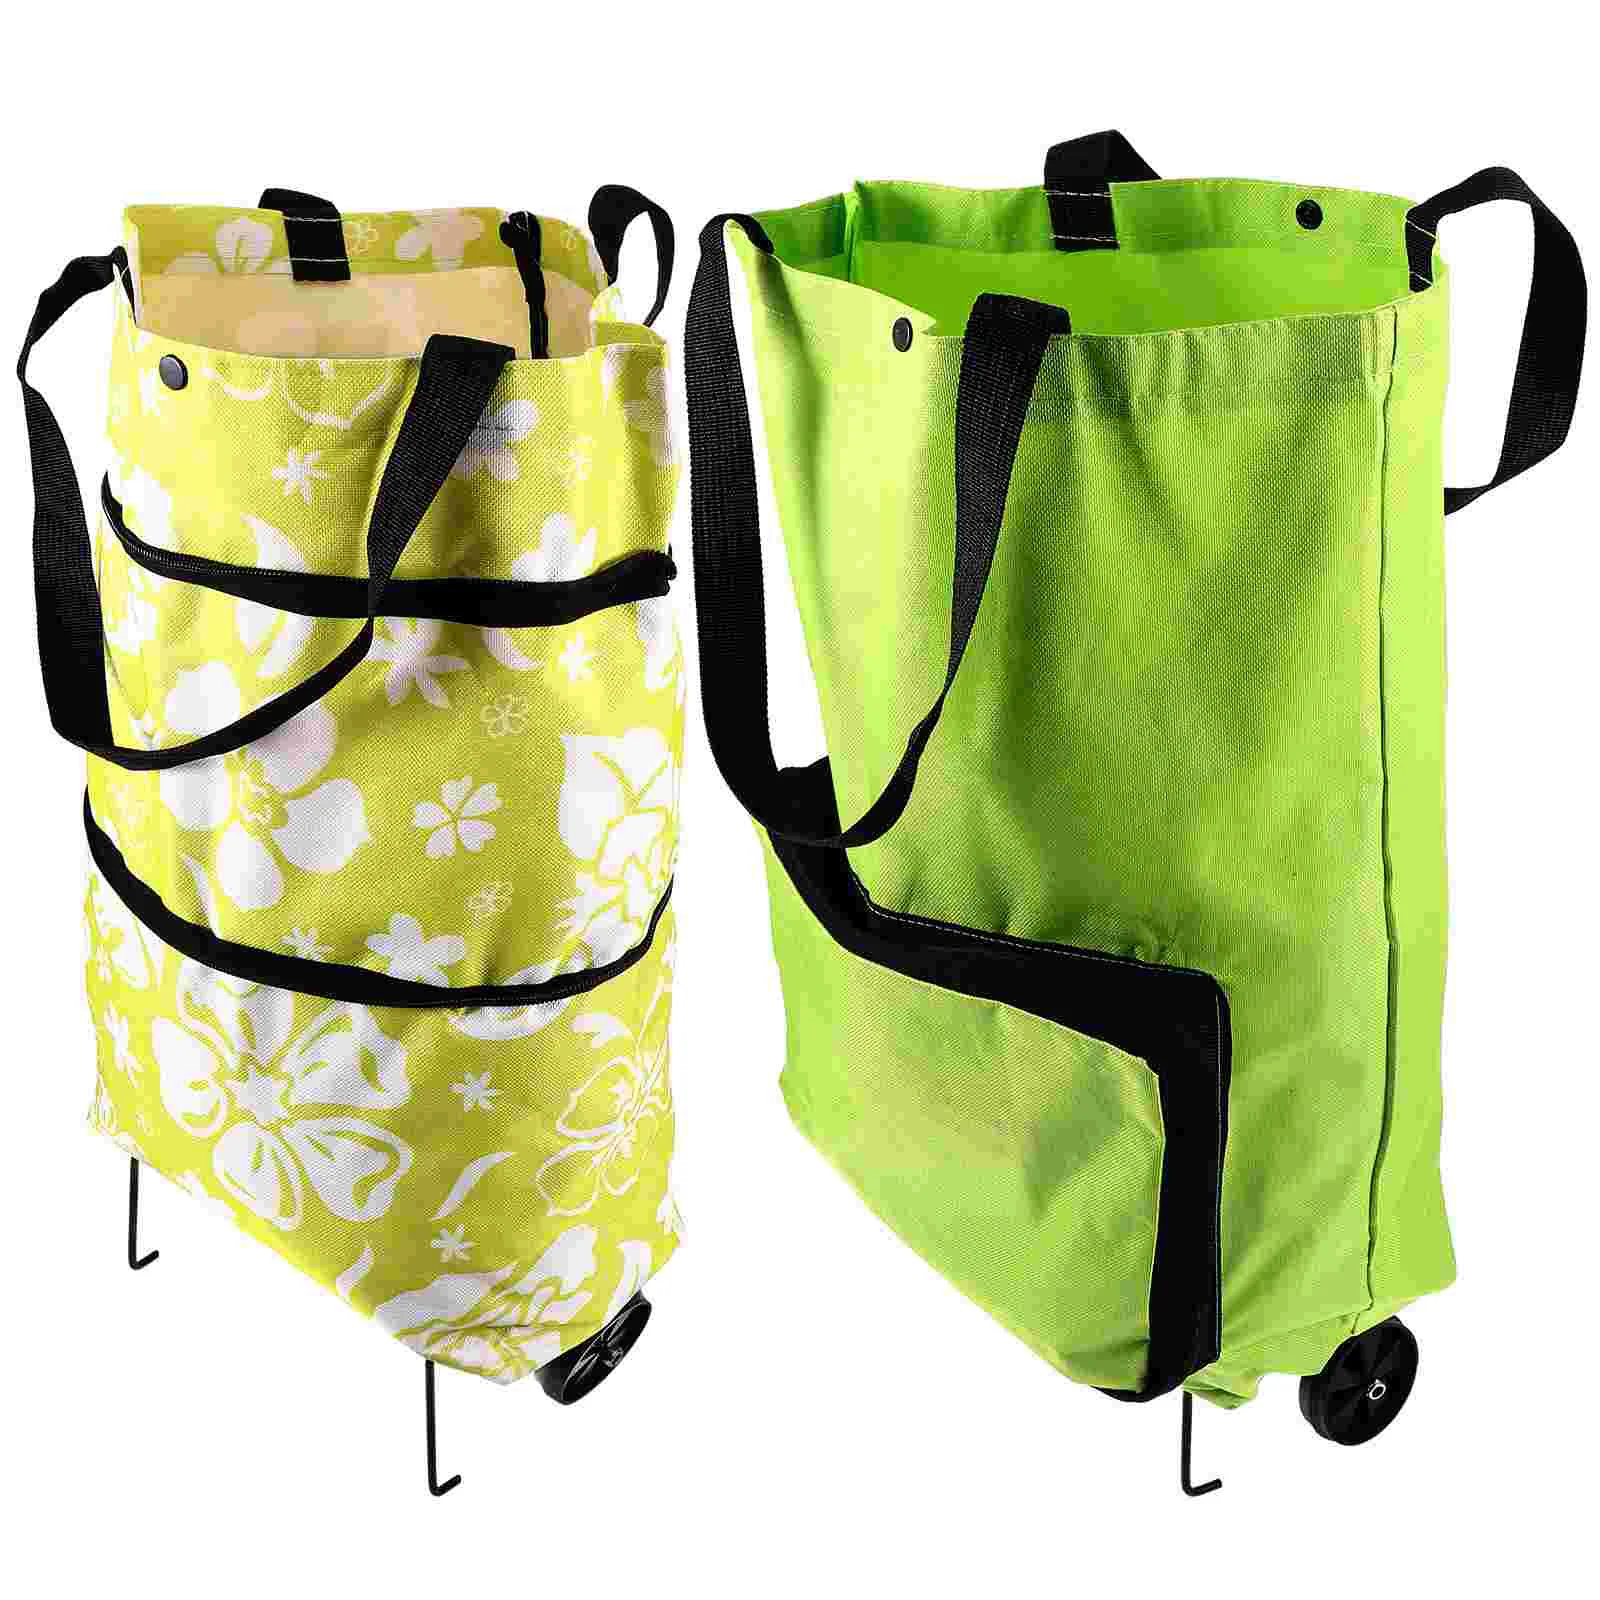 

2 Pcs Collapsible Shopping Bags Cart Crate Wheels Go Outdoor Grocery Tote Trolley Collapsable Wagon